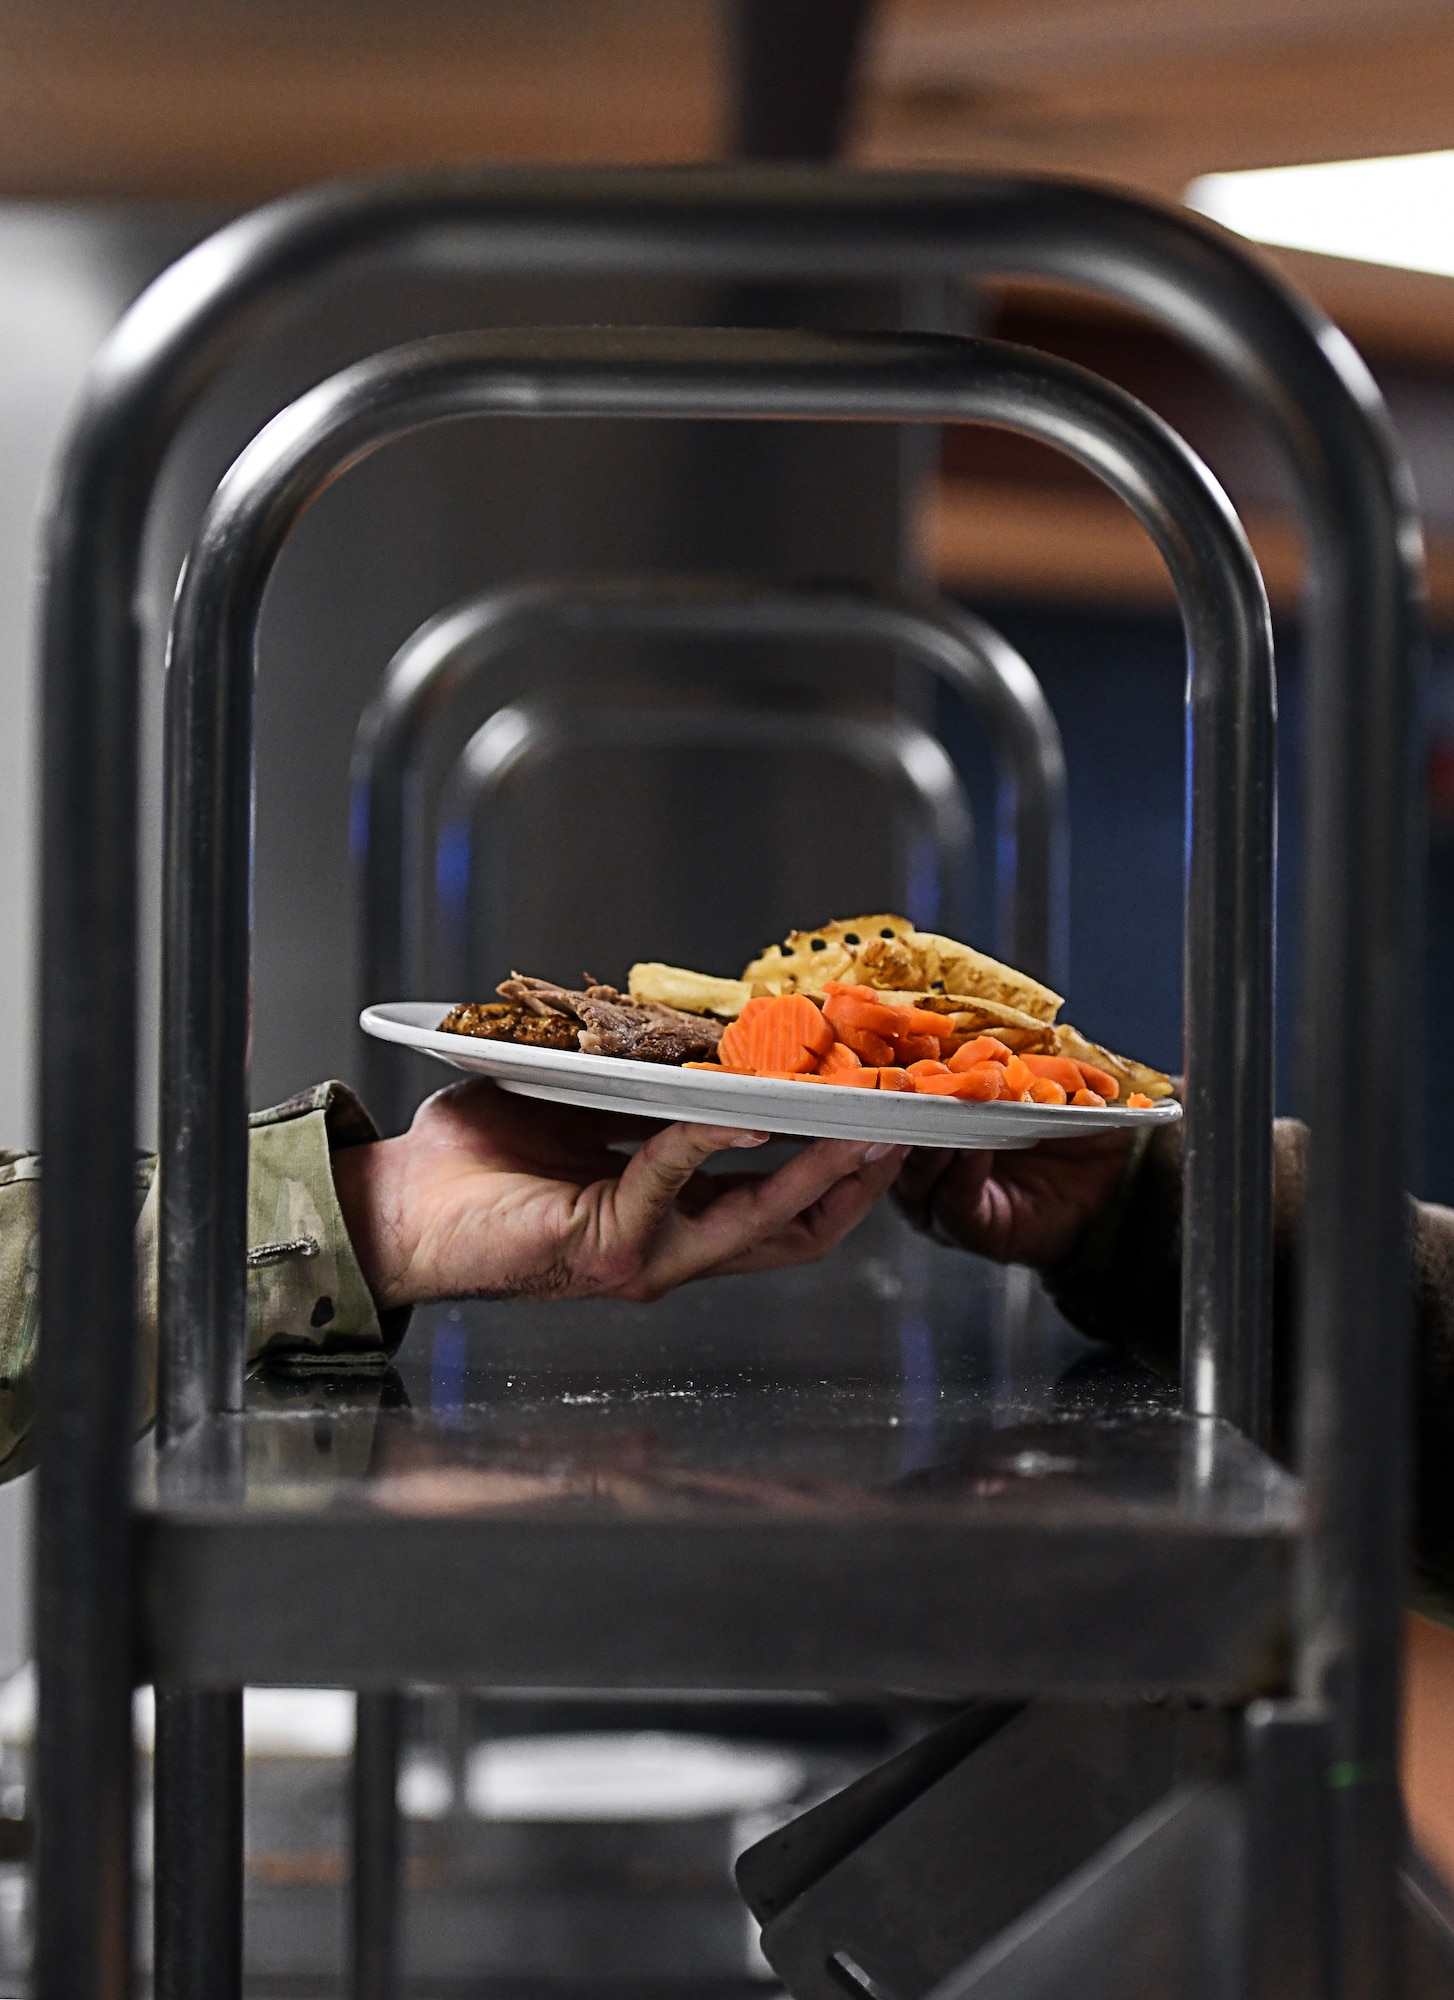 A plate of food is handed off at the dining facility over the countertop.